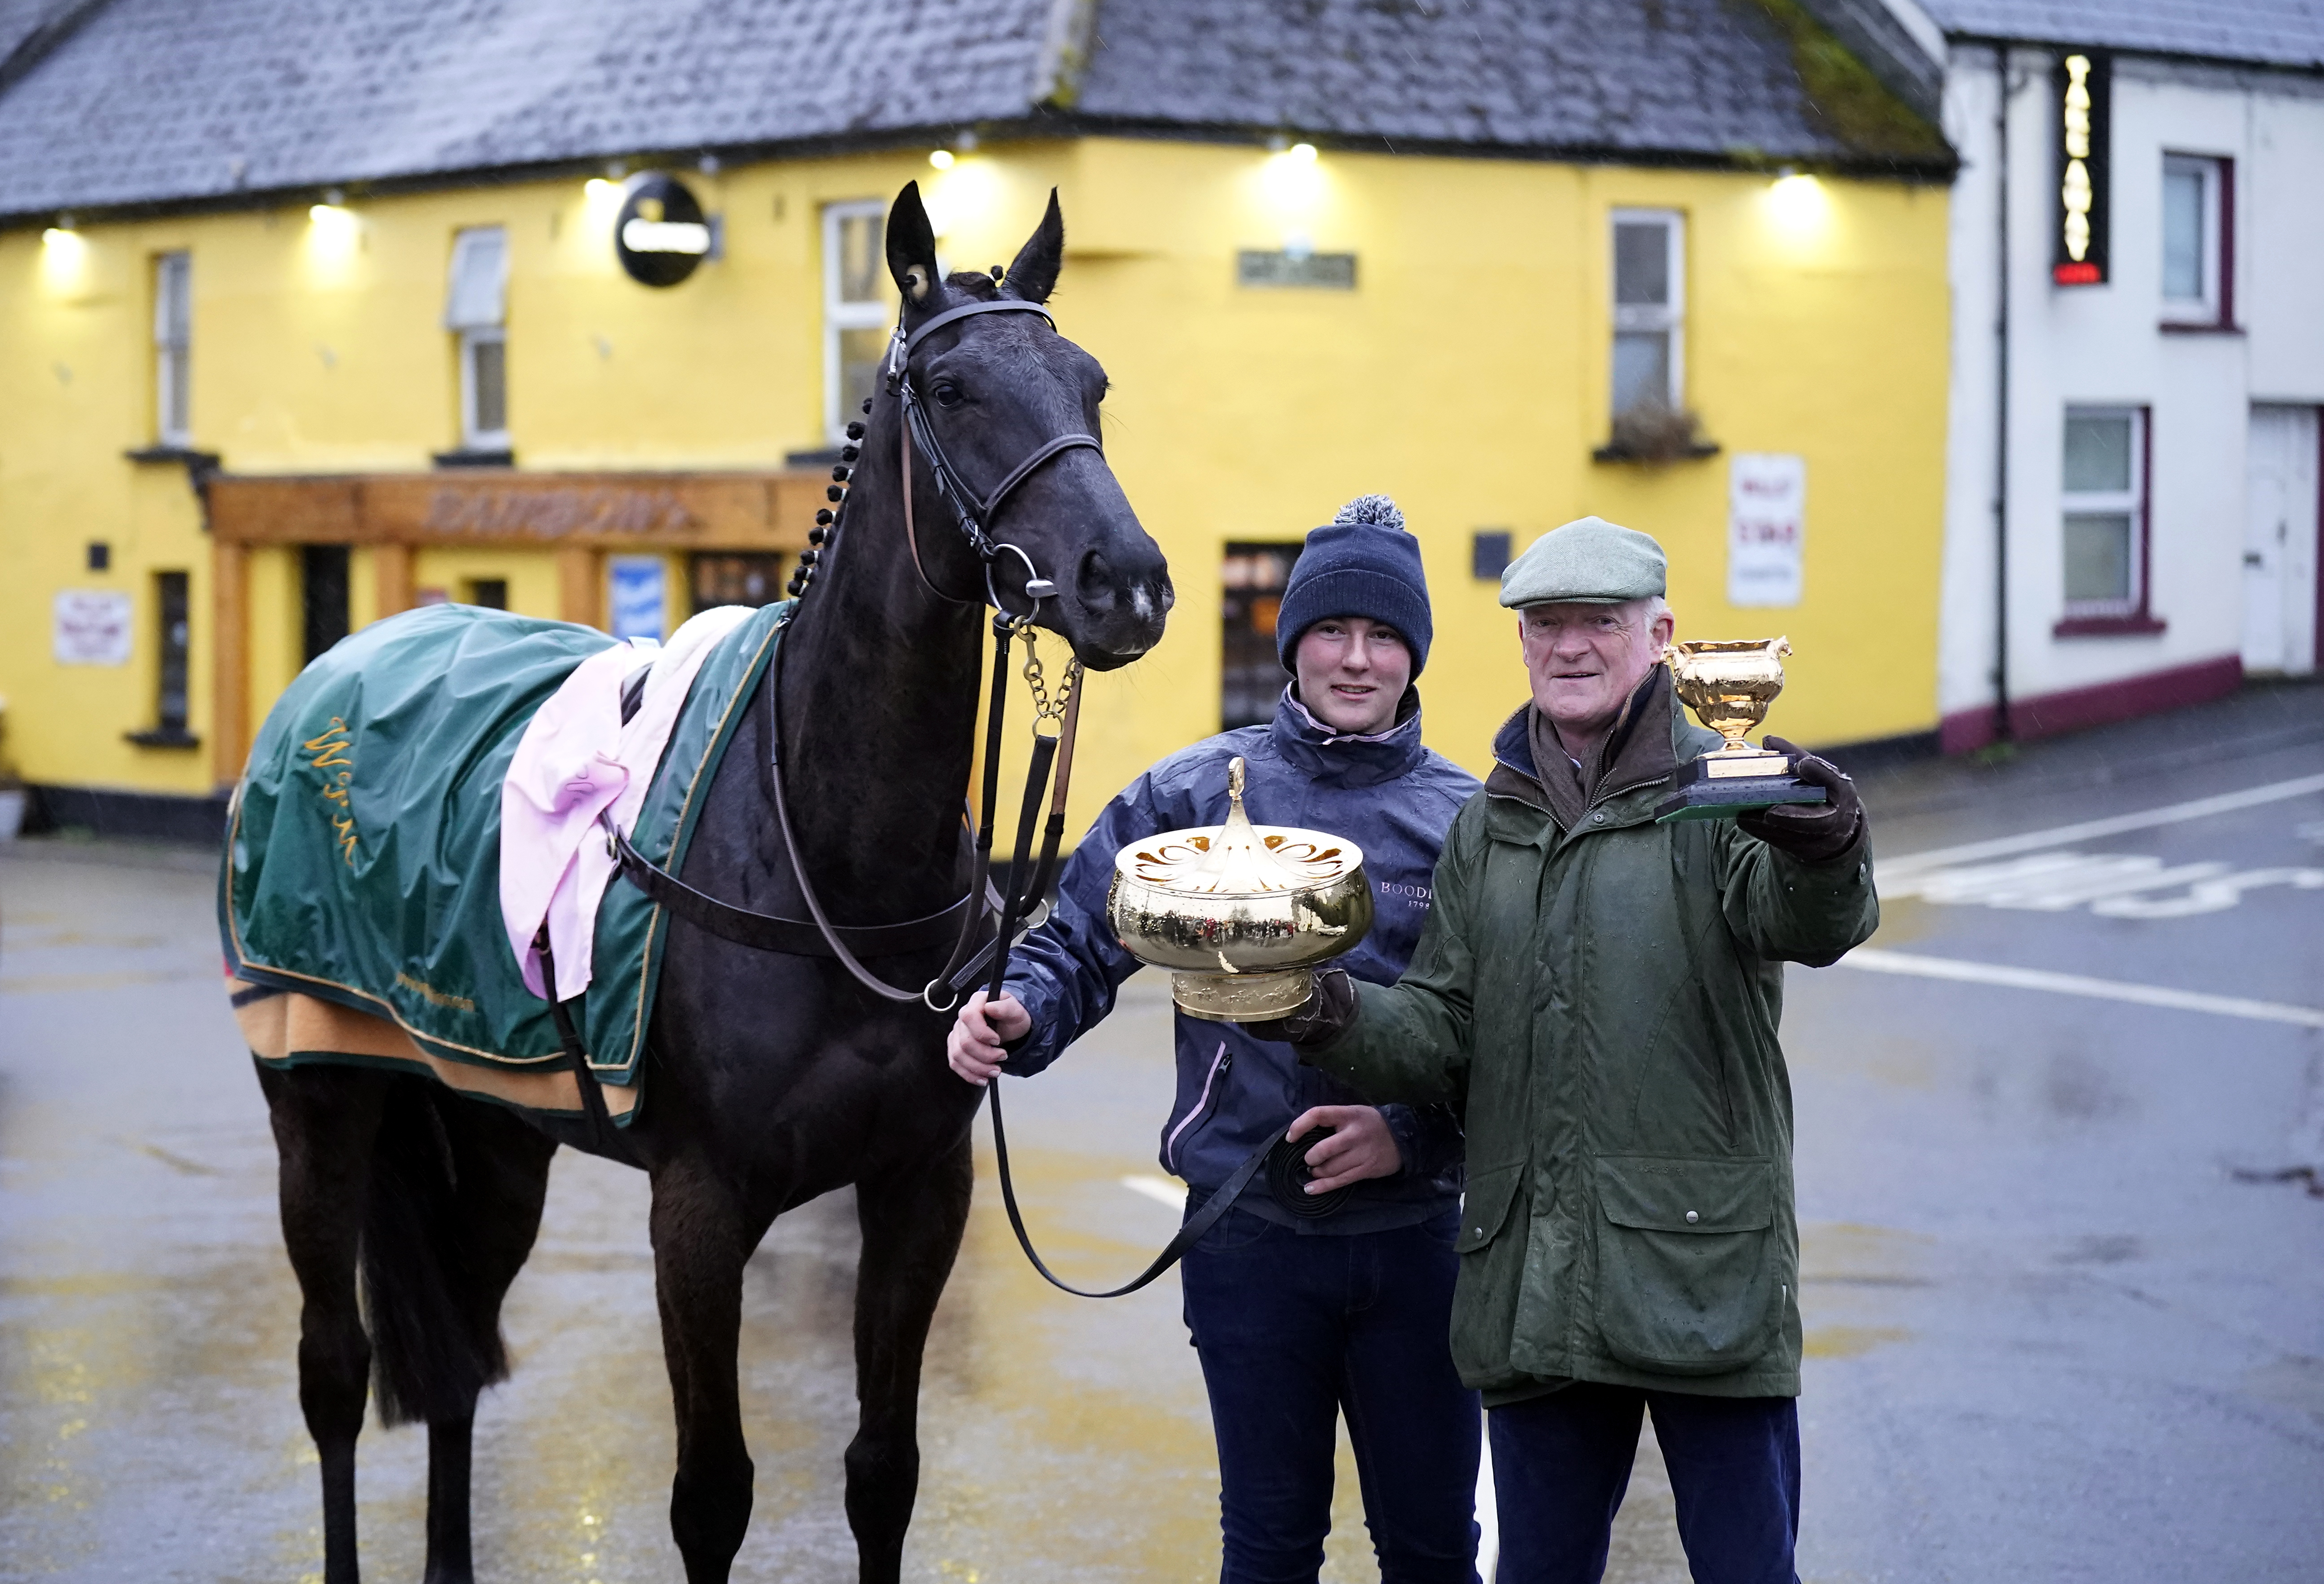 Galopin Des Champs along with trainer Willie Mullins during the homecoming parade through the village of Leighlinbridge in County Carlow